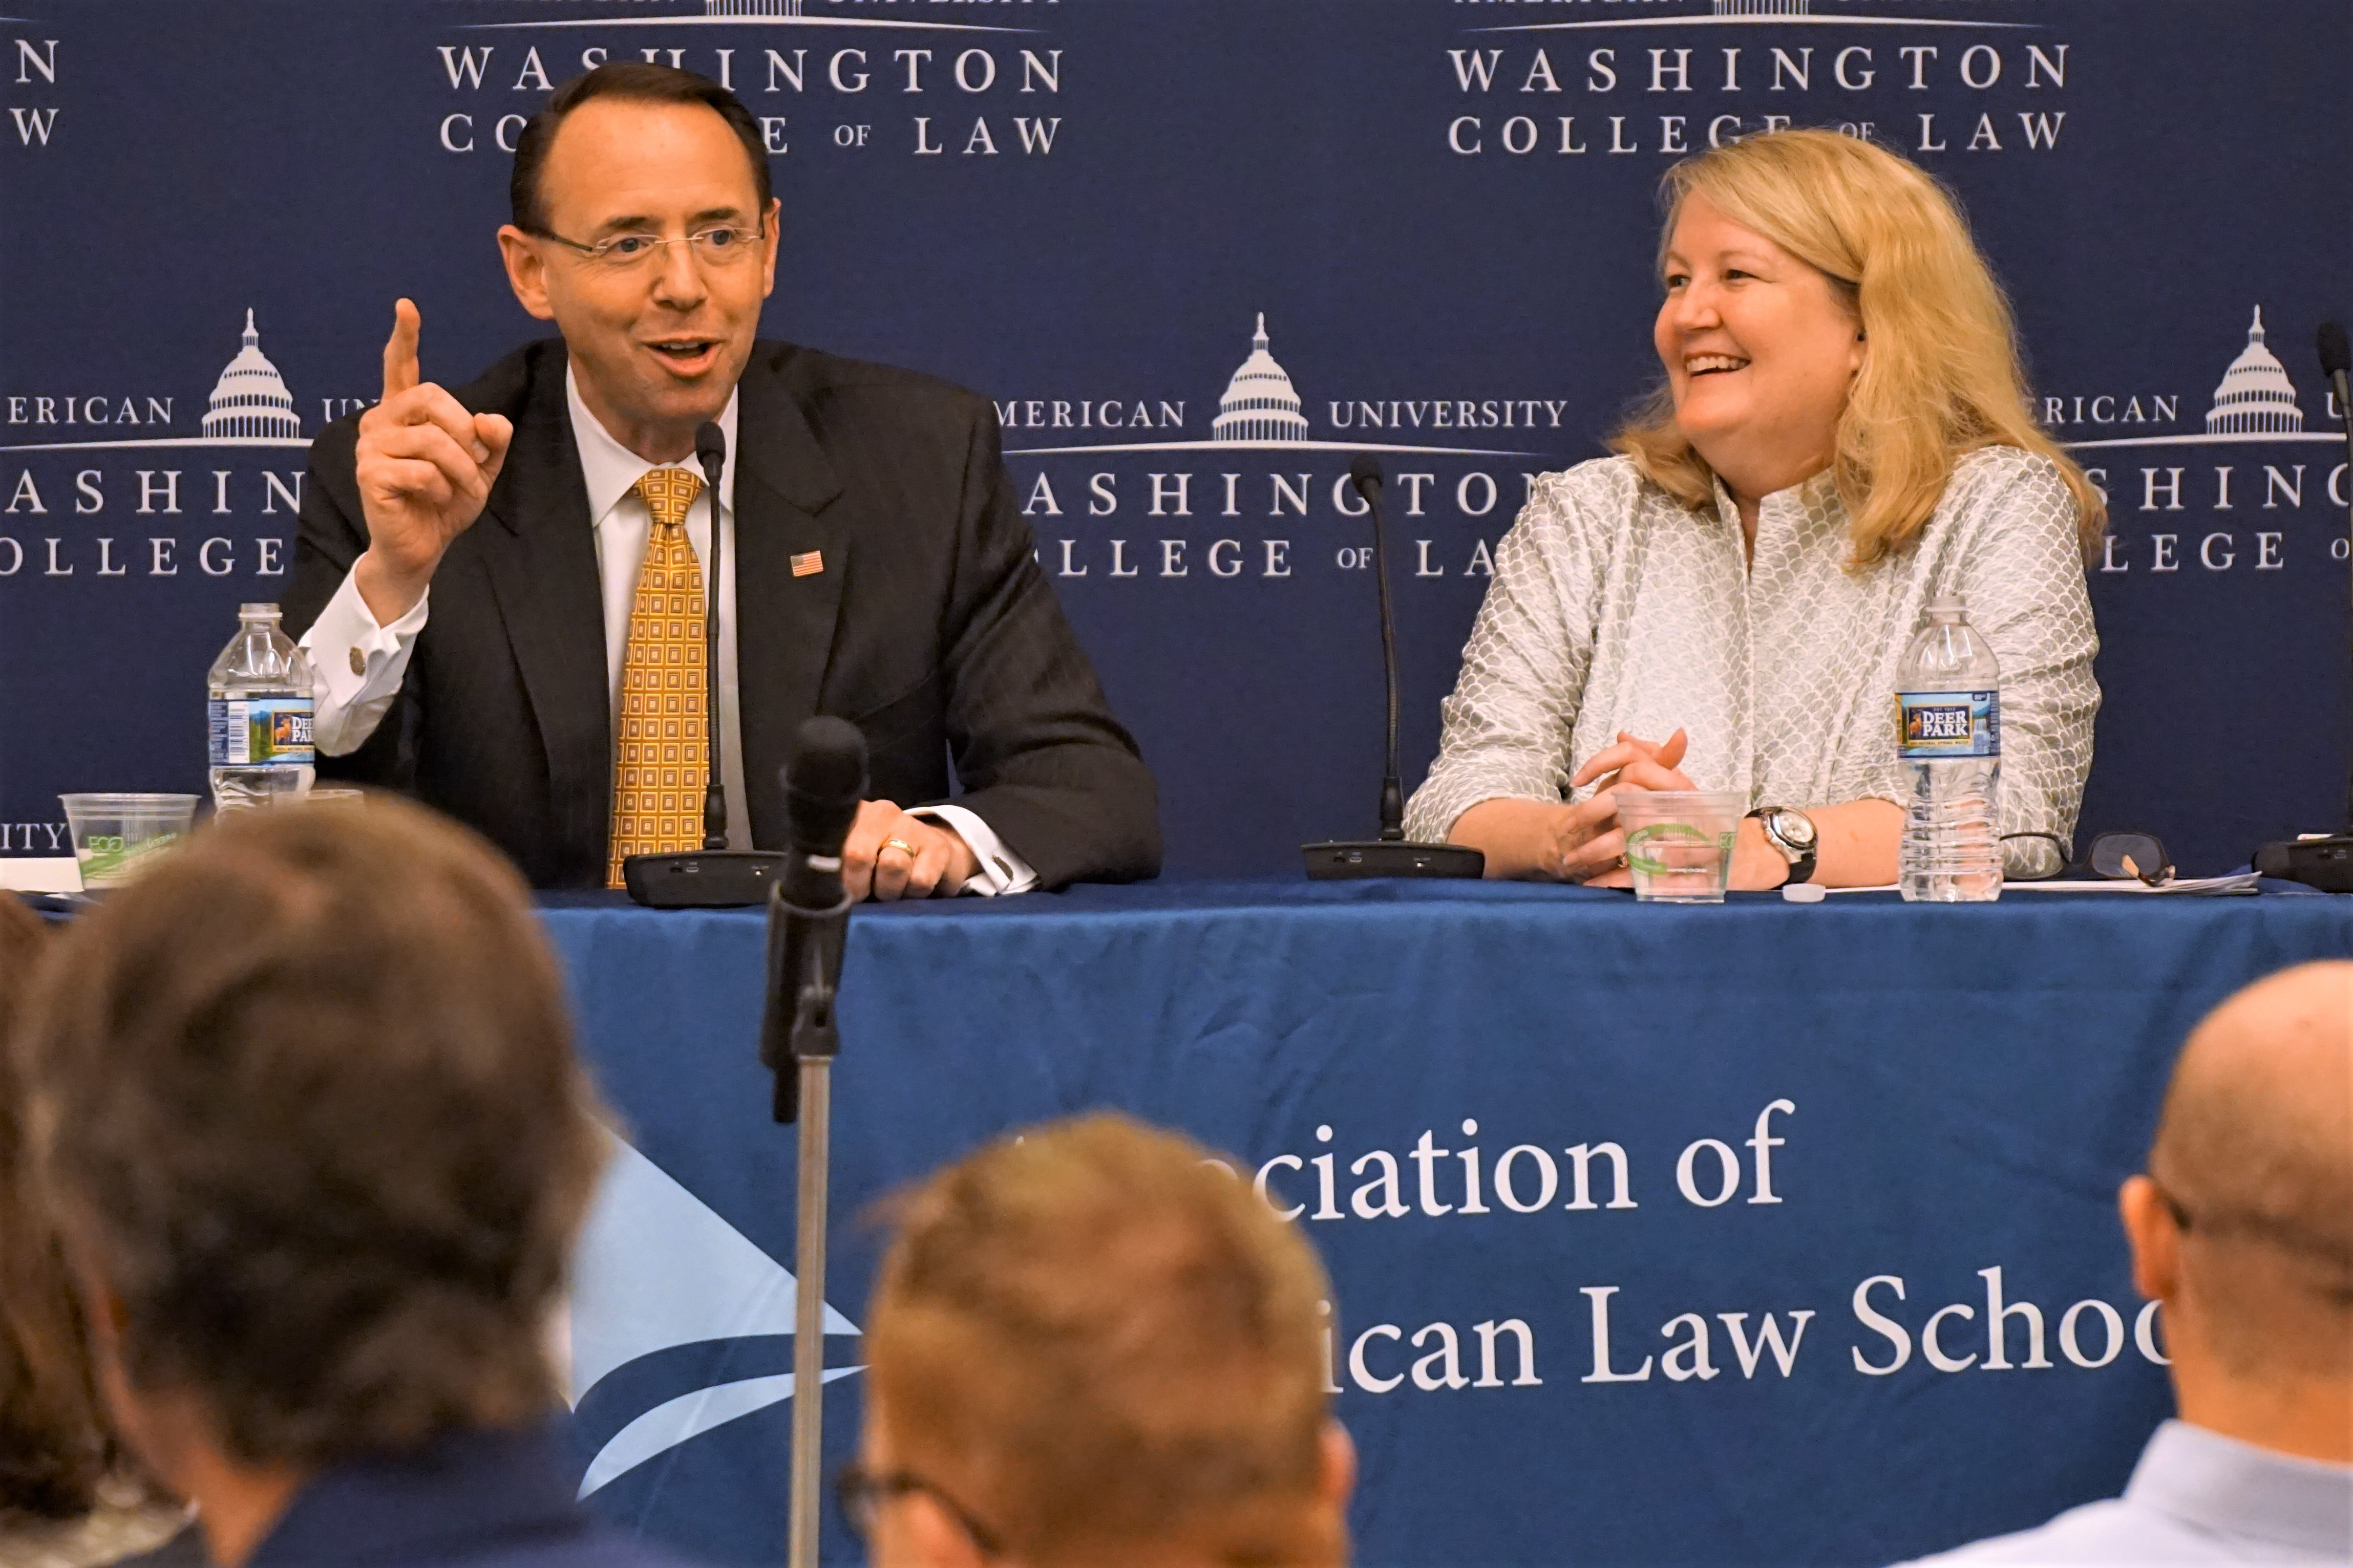 Rod Rosenstein, Deputy U.S. Attorney General addresses AALS Midyear Meeting attendees during a session moderated by Jennifer Collins, Dean of Southern Methodist University Dedman School of Law.